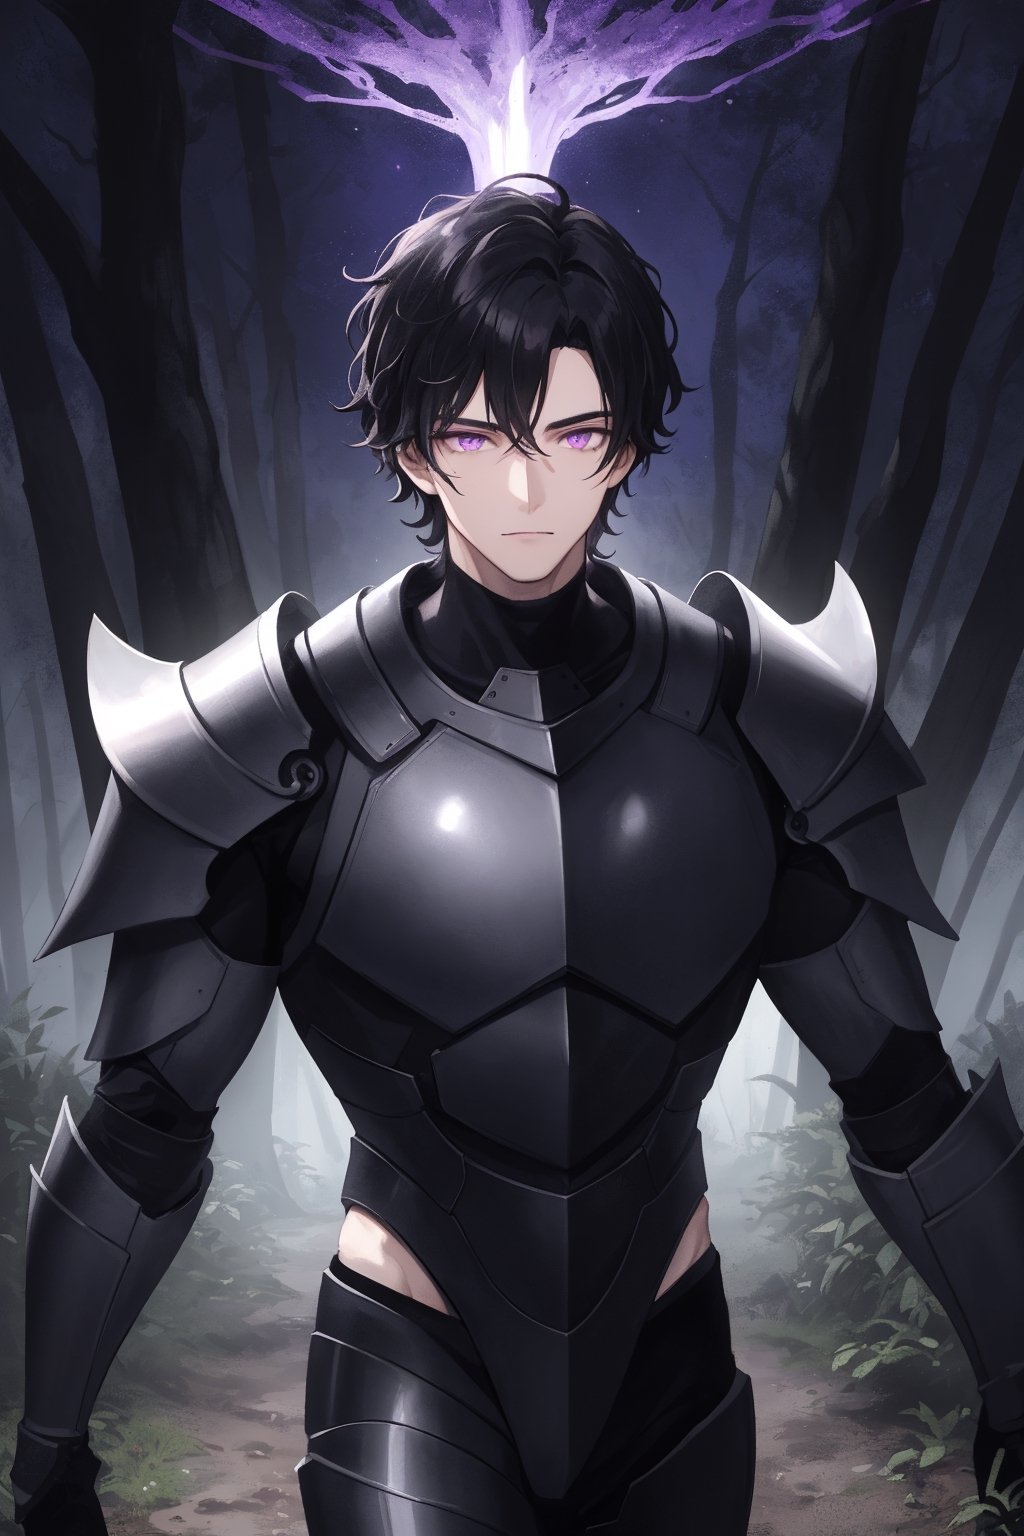 1man, young man,  25 years old,  short black hair,wavy hair,  glowing violet eyes, pale skin,  walking in a magical forest,  magical forest background,  day,  day light, wearing a heavy armor,  training,  challenger face,  fitness body,  piece teacher,  perfect face,  high quality,  American shot,  perfect face,  perfect hands,  muscular sensual body,  aesthetic and sensual body, Detailedface,1boy